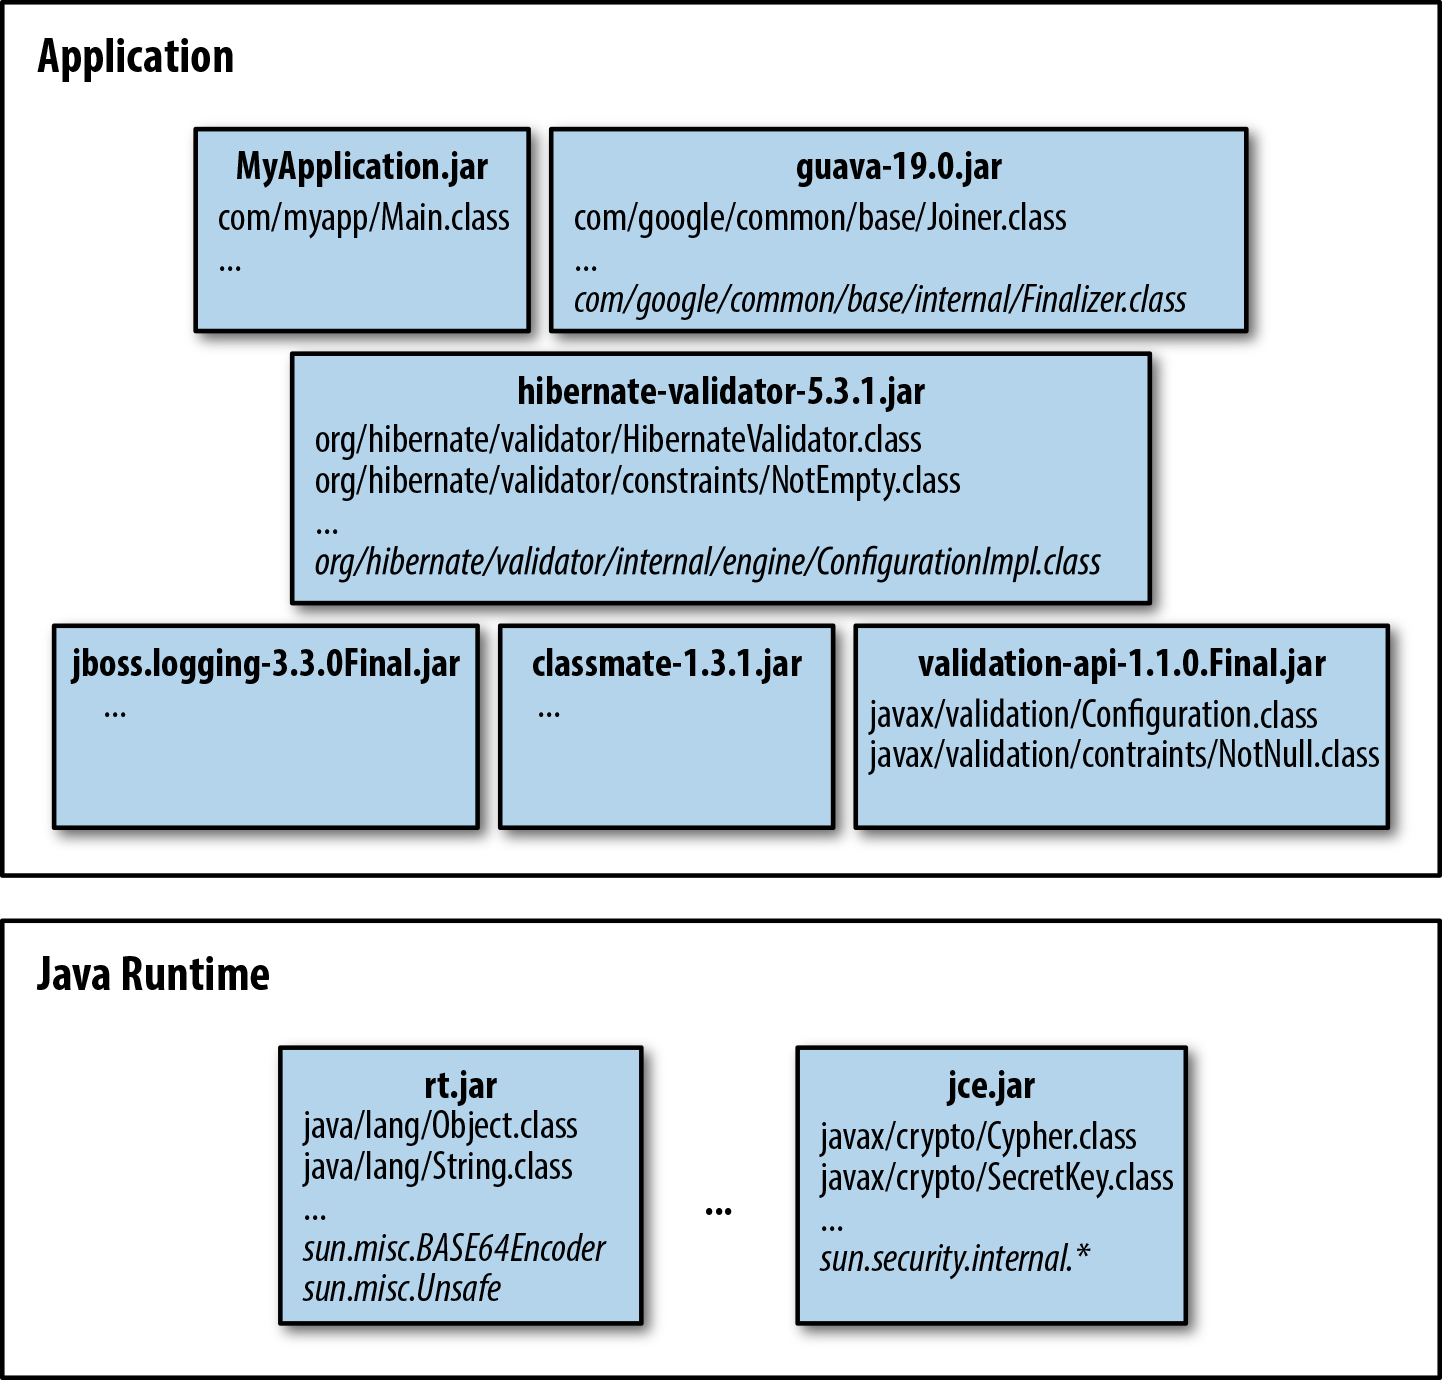 A typical application running on the JVM